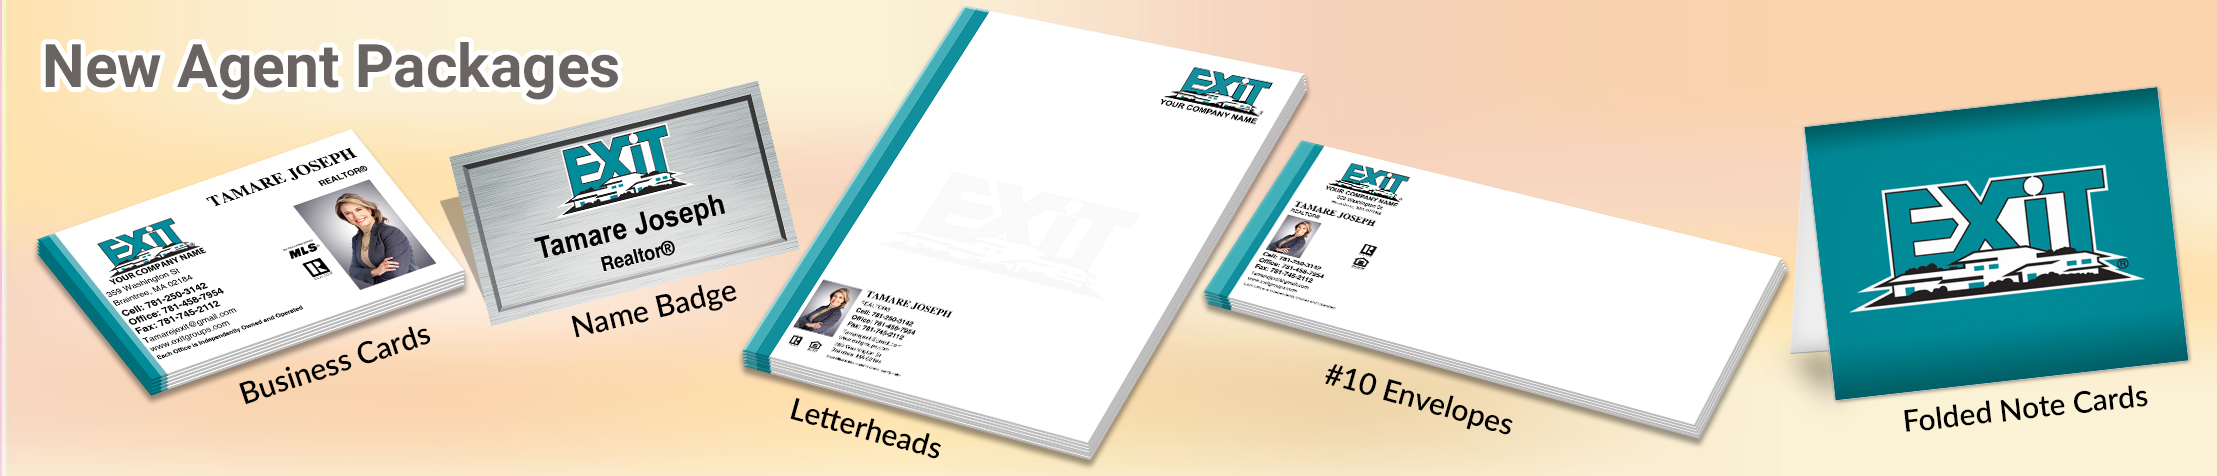 EXIT Realty Real Estate Gold, Silver and Bronze Agent Packages -  personalized business cards, letterhead, envelopes and note cards | BestPrintBuy.com